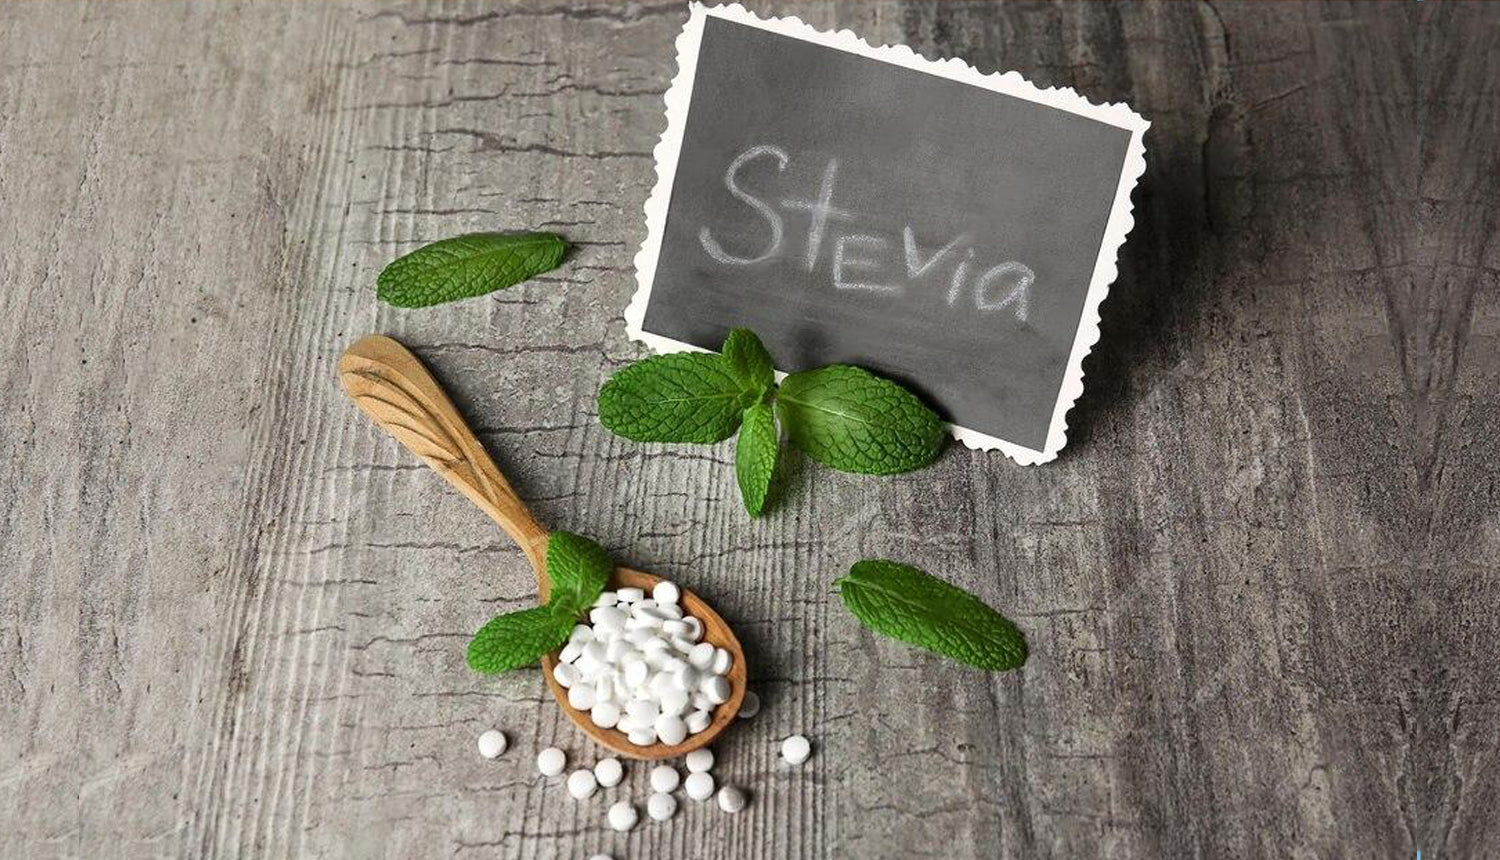 Advantages of Stevia - Side Effects, Facts, Safety and More